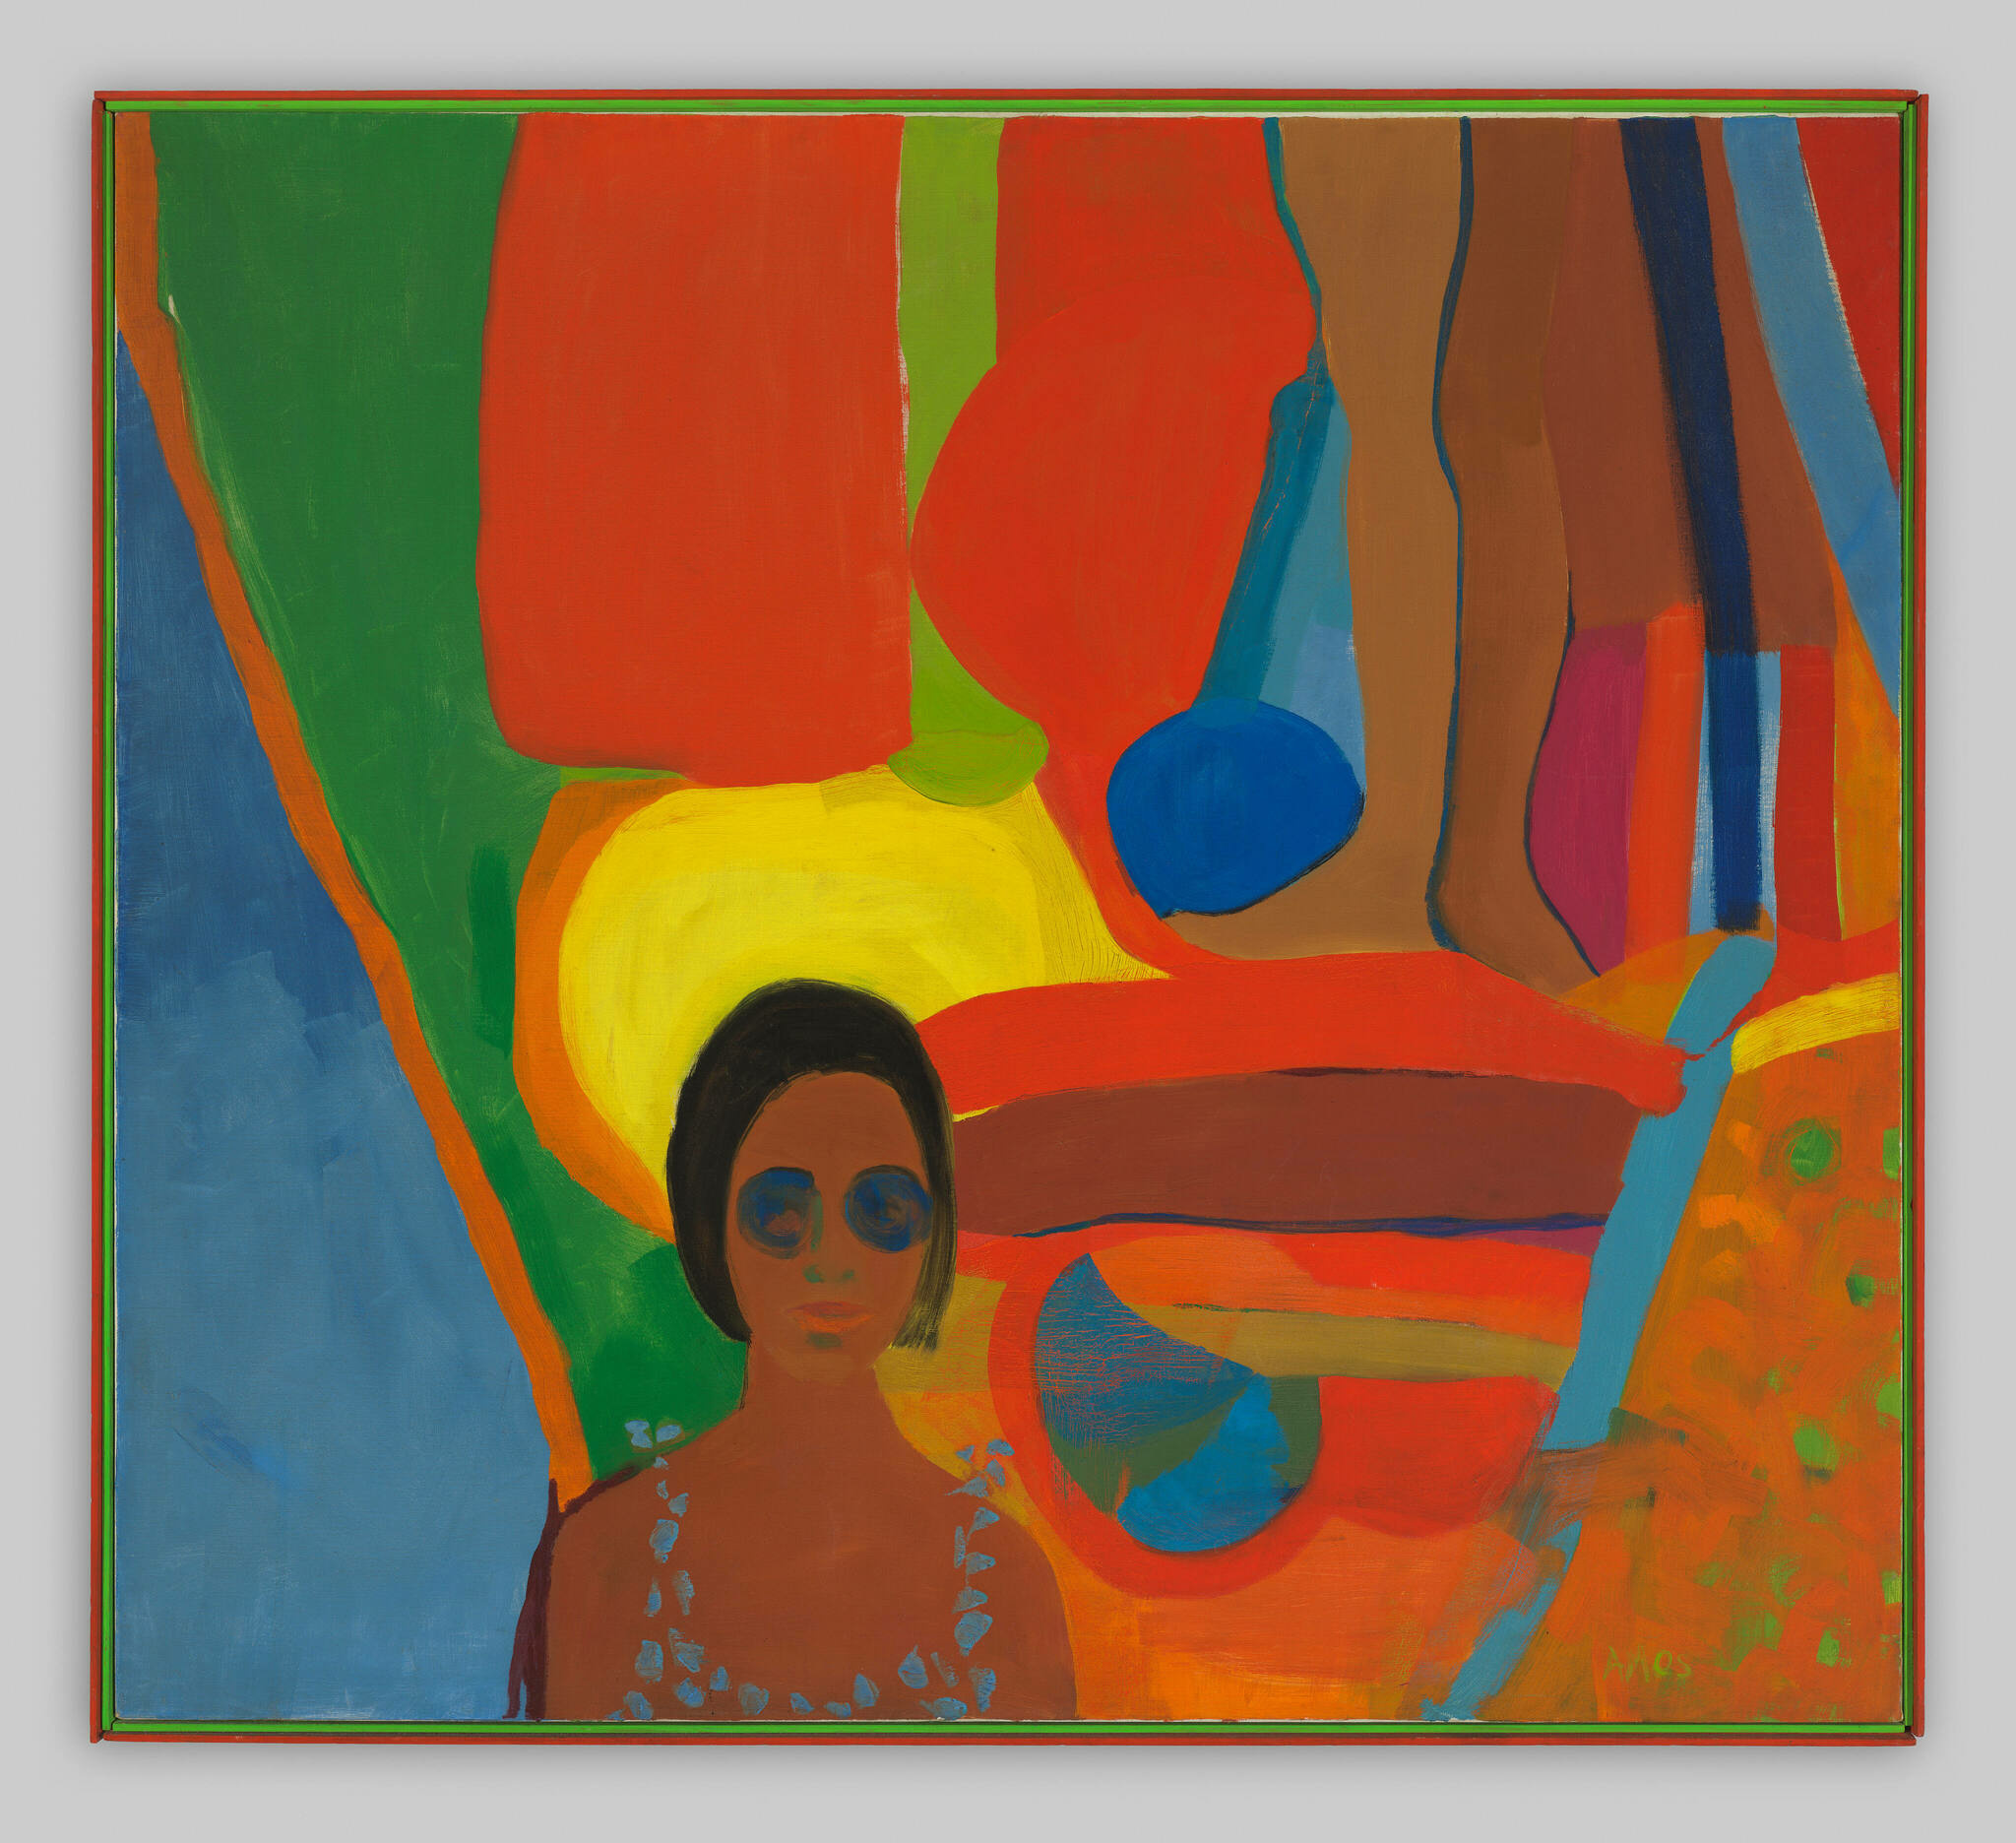 Emma Amos, Baby, 1966, Collection of the Studio Museum in Harlem and the Whitney Museum of American Art, New York, NY, USA.